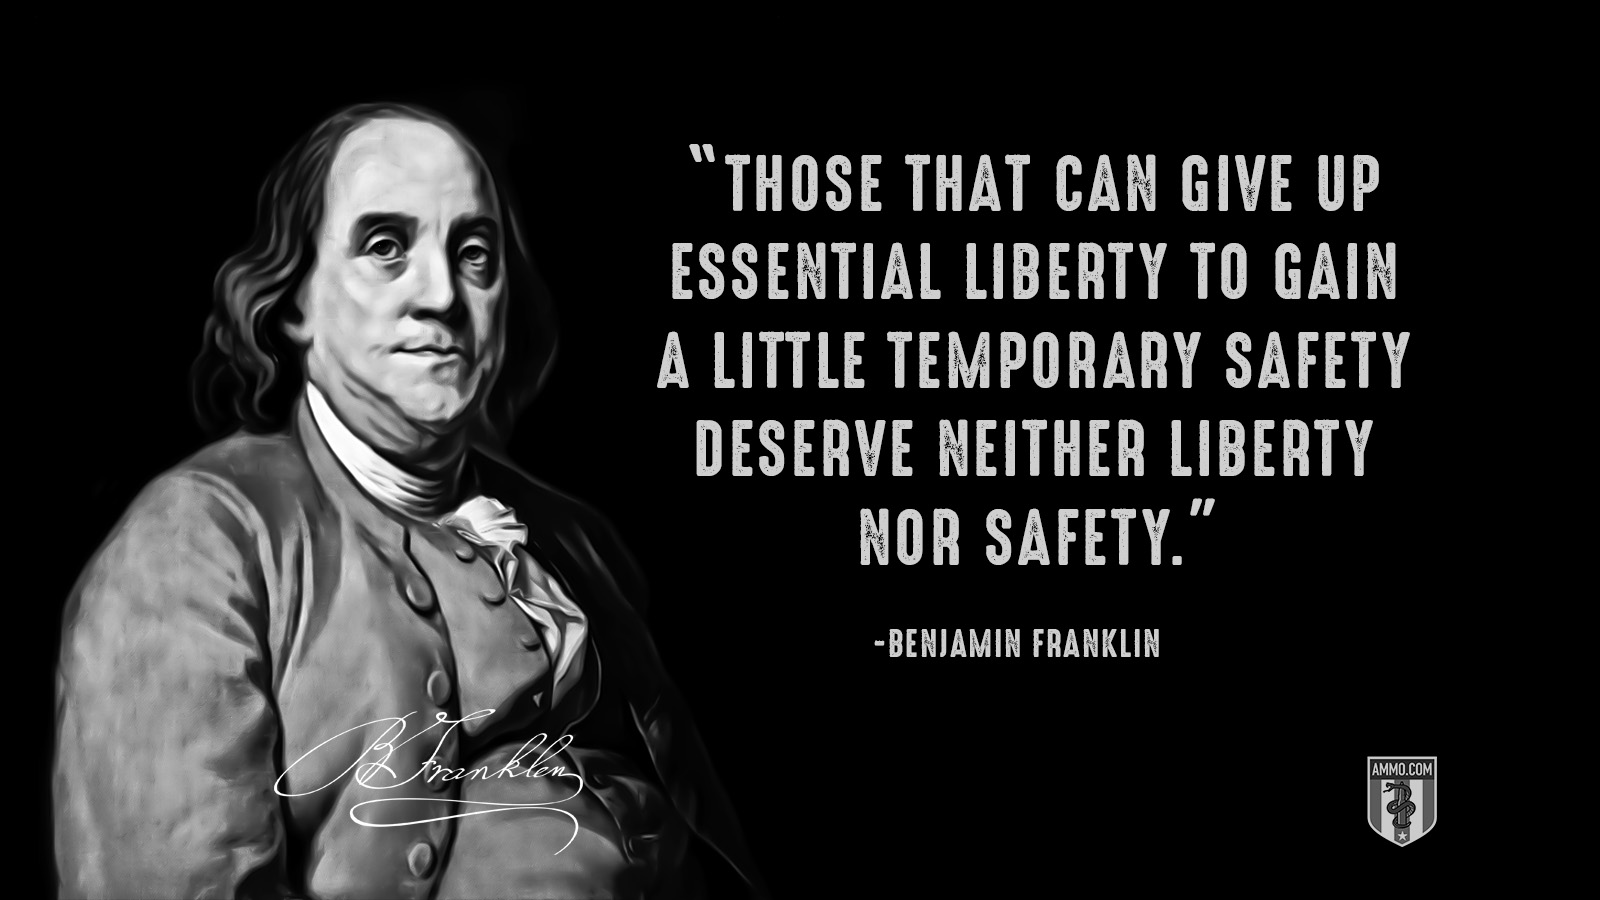 Benjamin-Franklin-Those-that-can-give-up-essential-liberty-to-gain-a-little-temporary-safety-deserve-neither-liberty-nor-safety.jpg